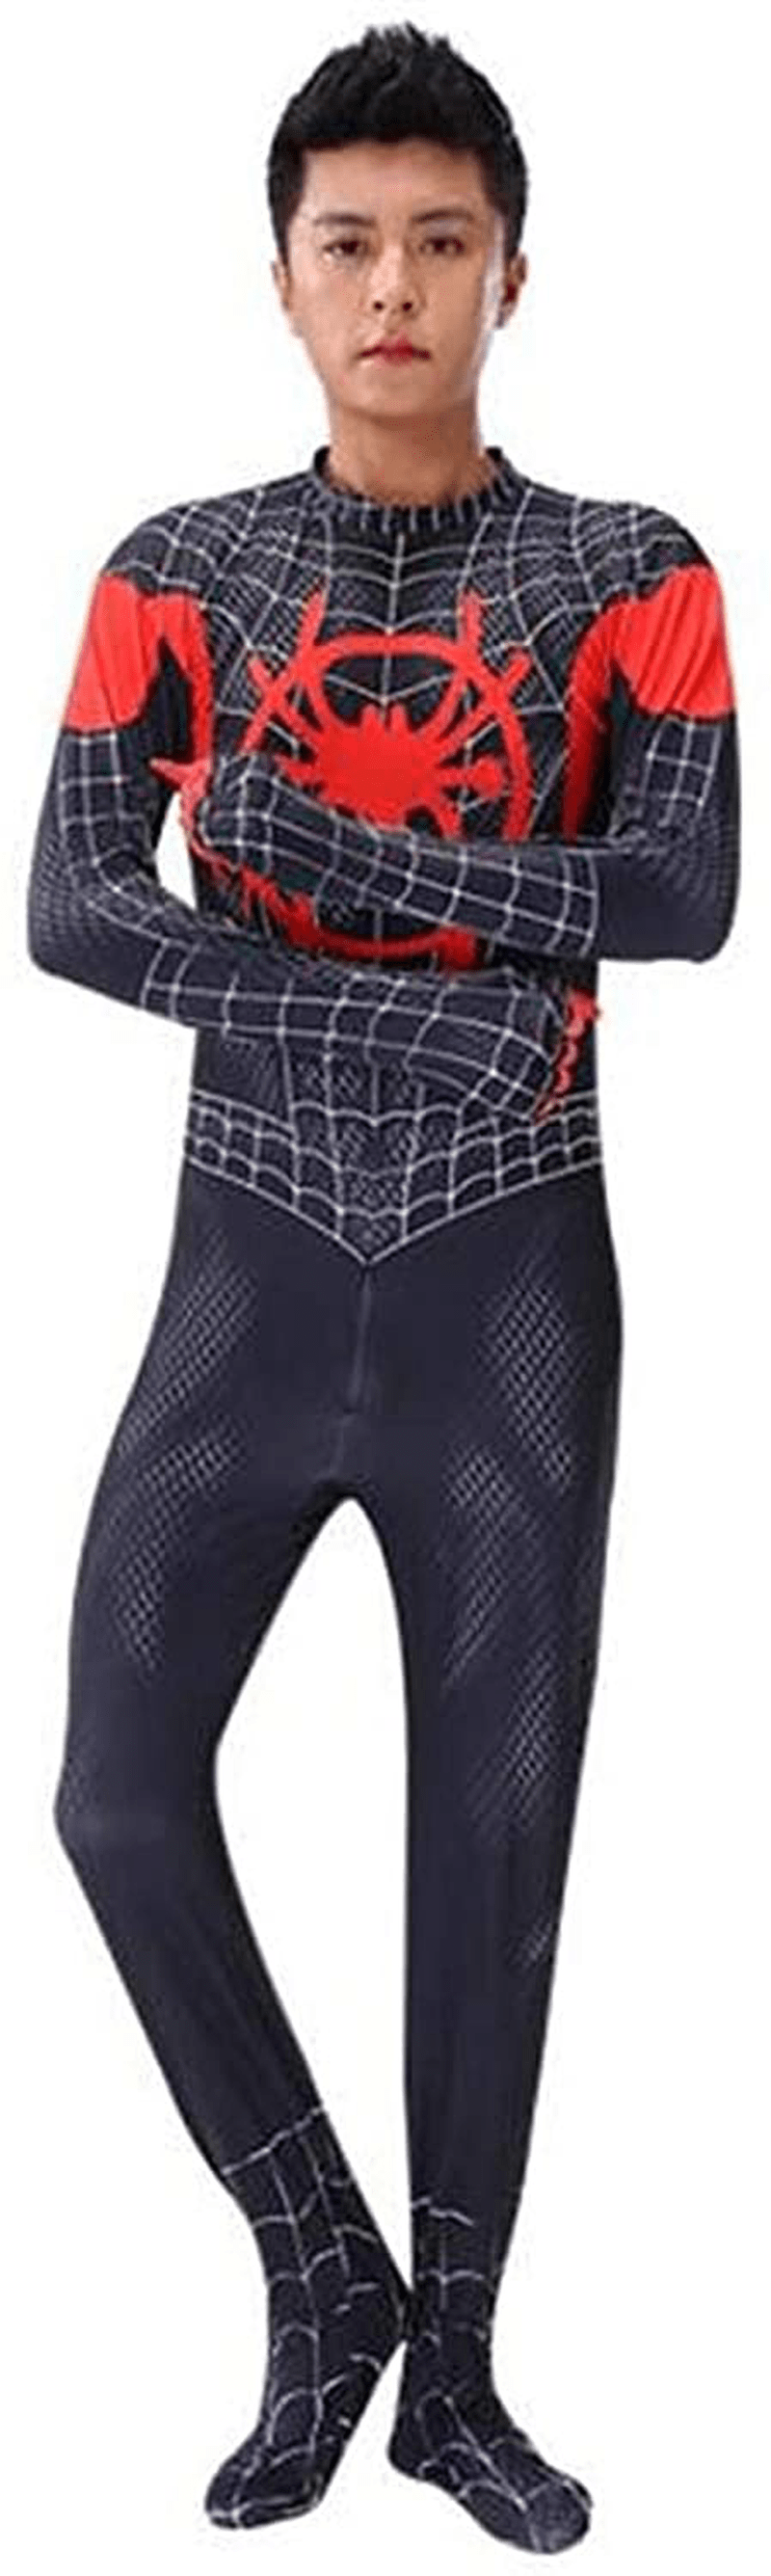 Cosplay Costume Kids Suits Halloween 3D Style Bodysuit Costumes Apparel & Accessories > Costumes & Accessories > Costumes Cosplay Costume   